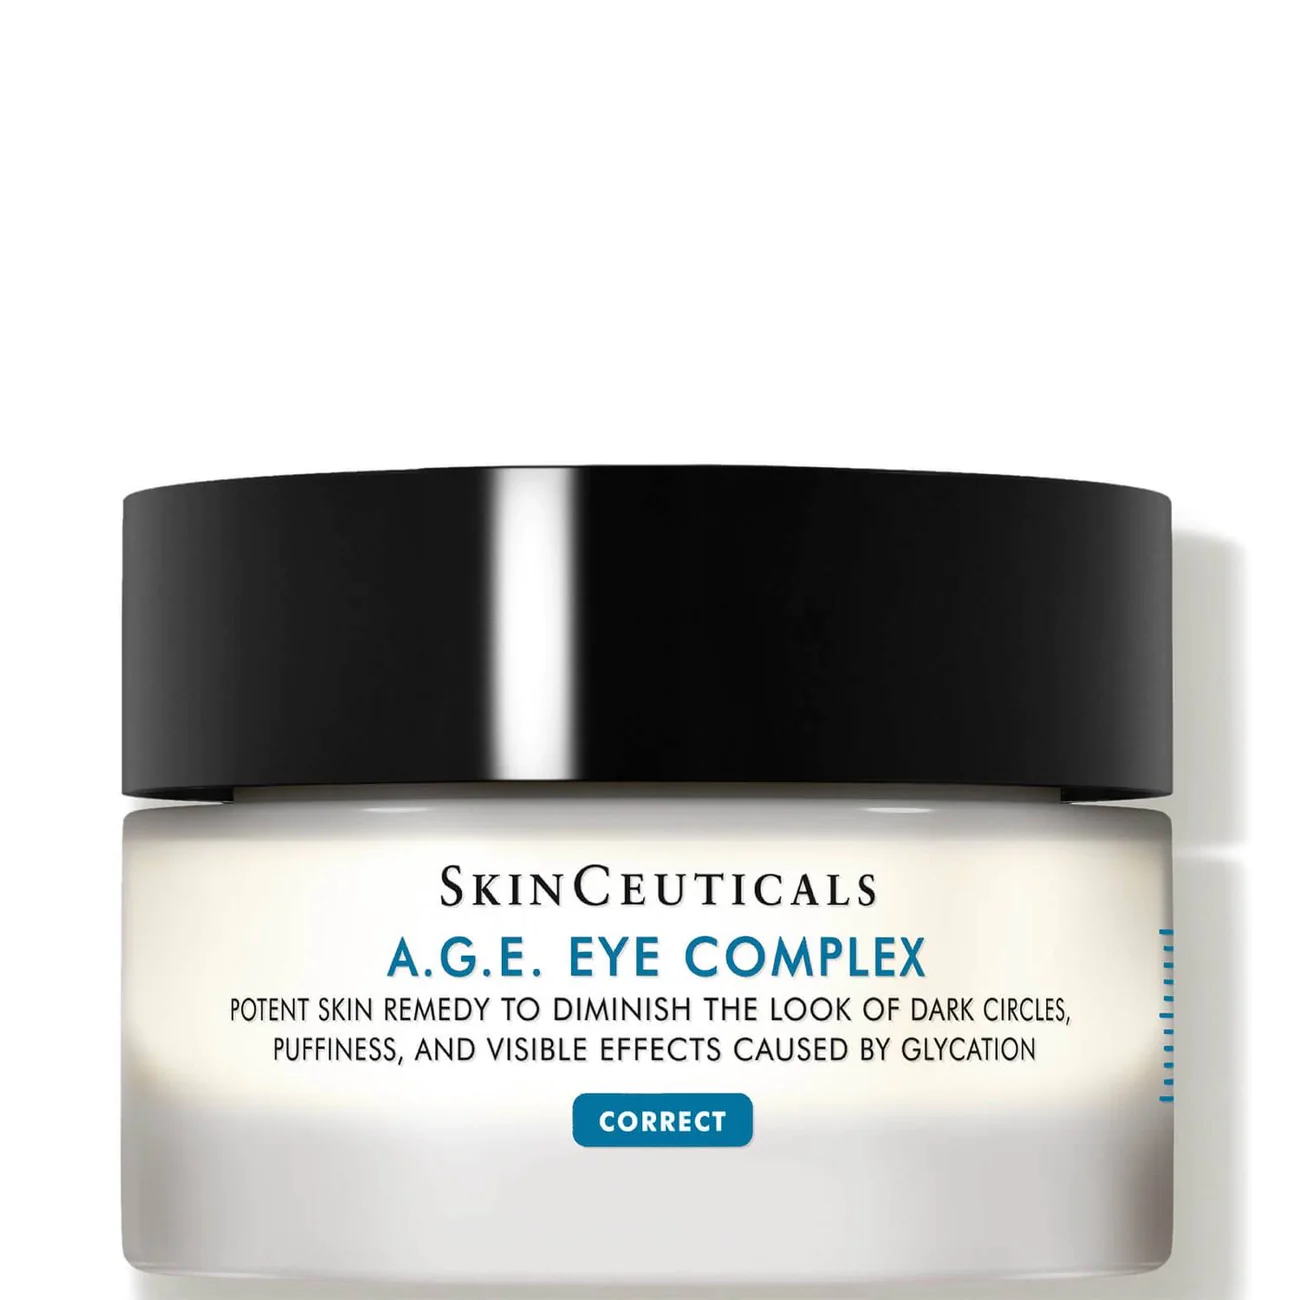 A jar of skinceuticals a.g.e. eye complex cream with a black lid and labeled as a potent skin remedy for diminishing dark circles and puffiness.